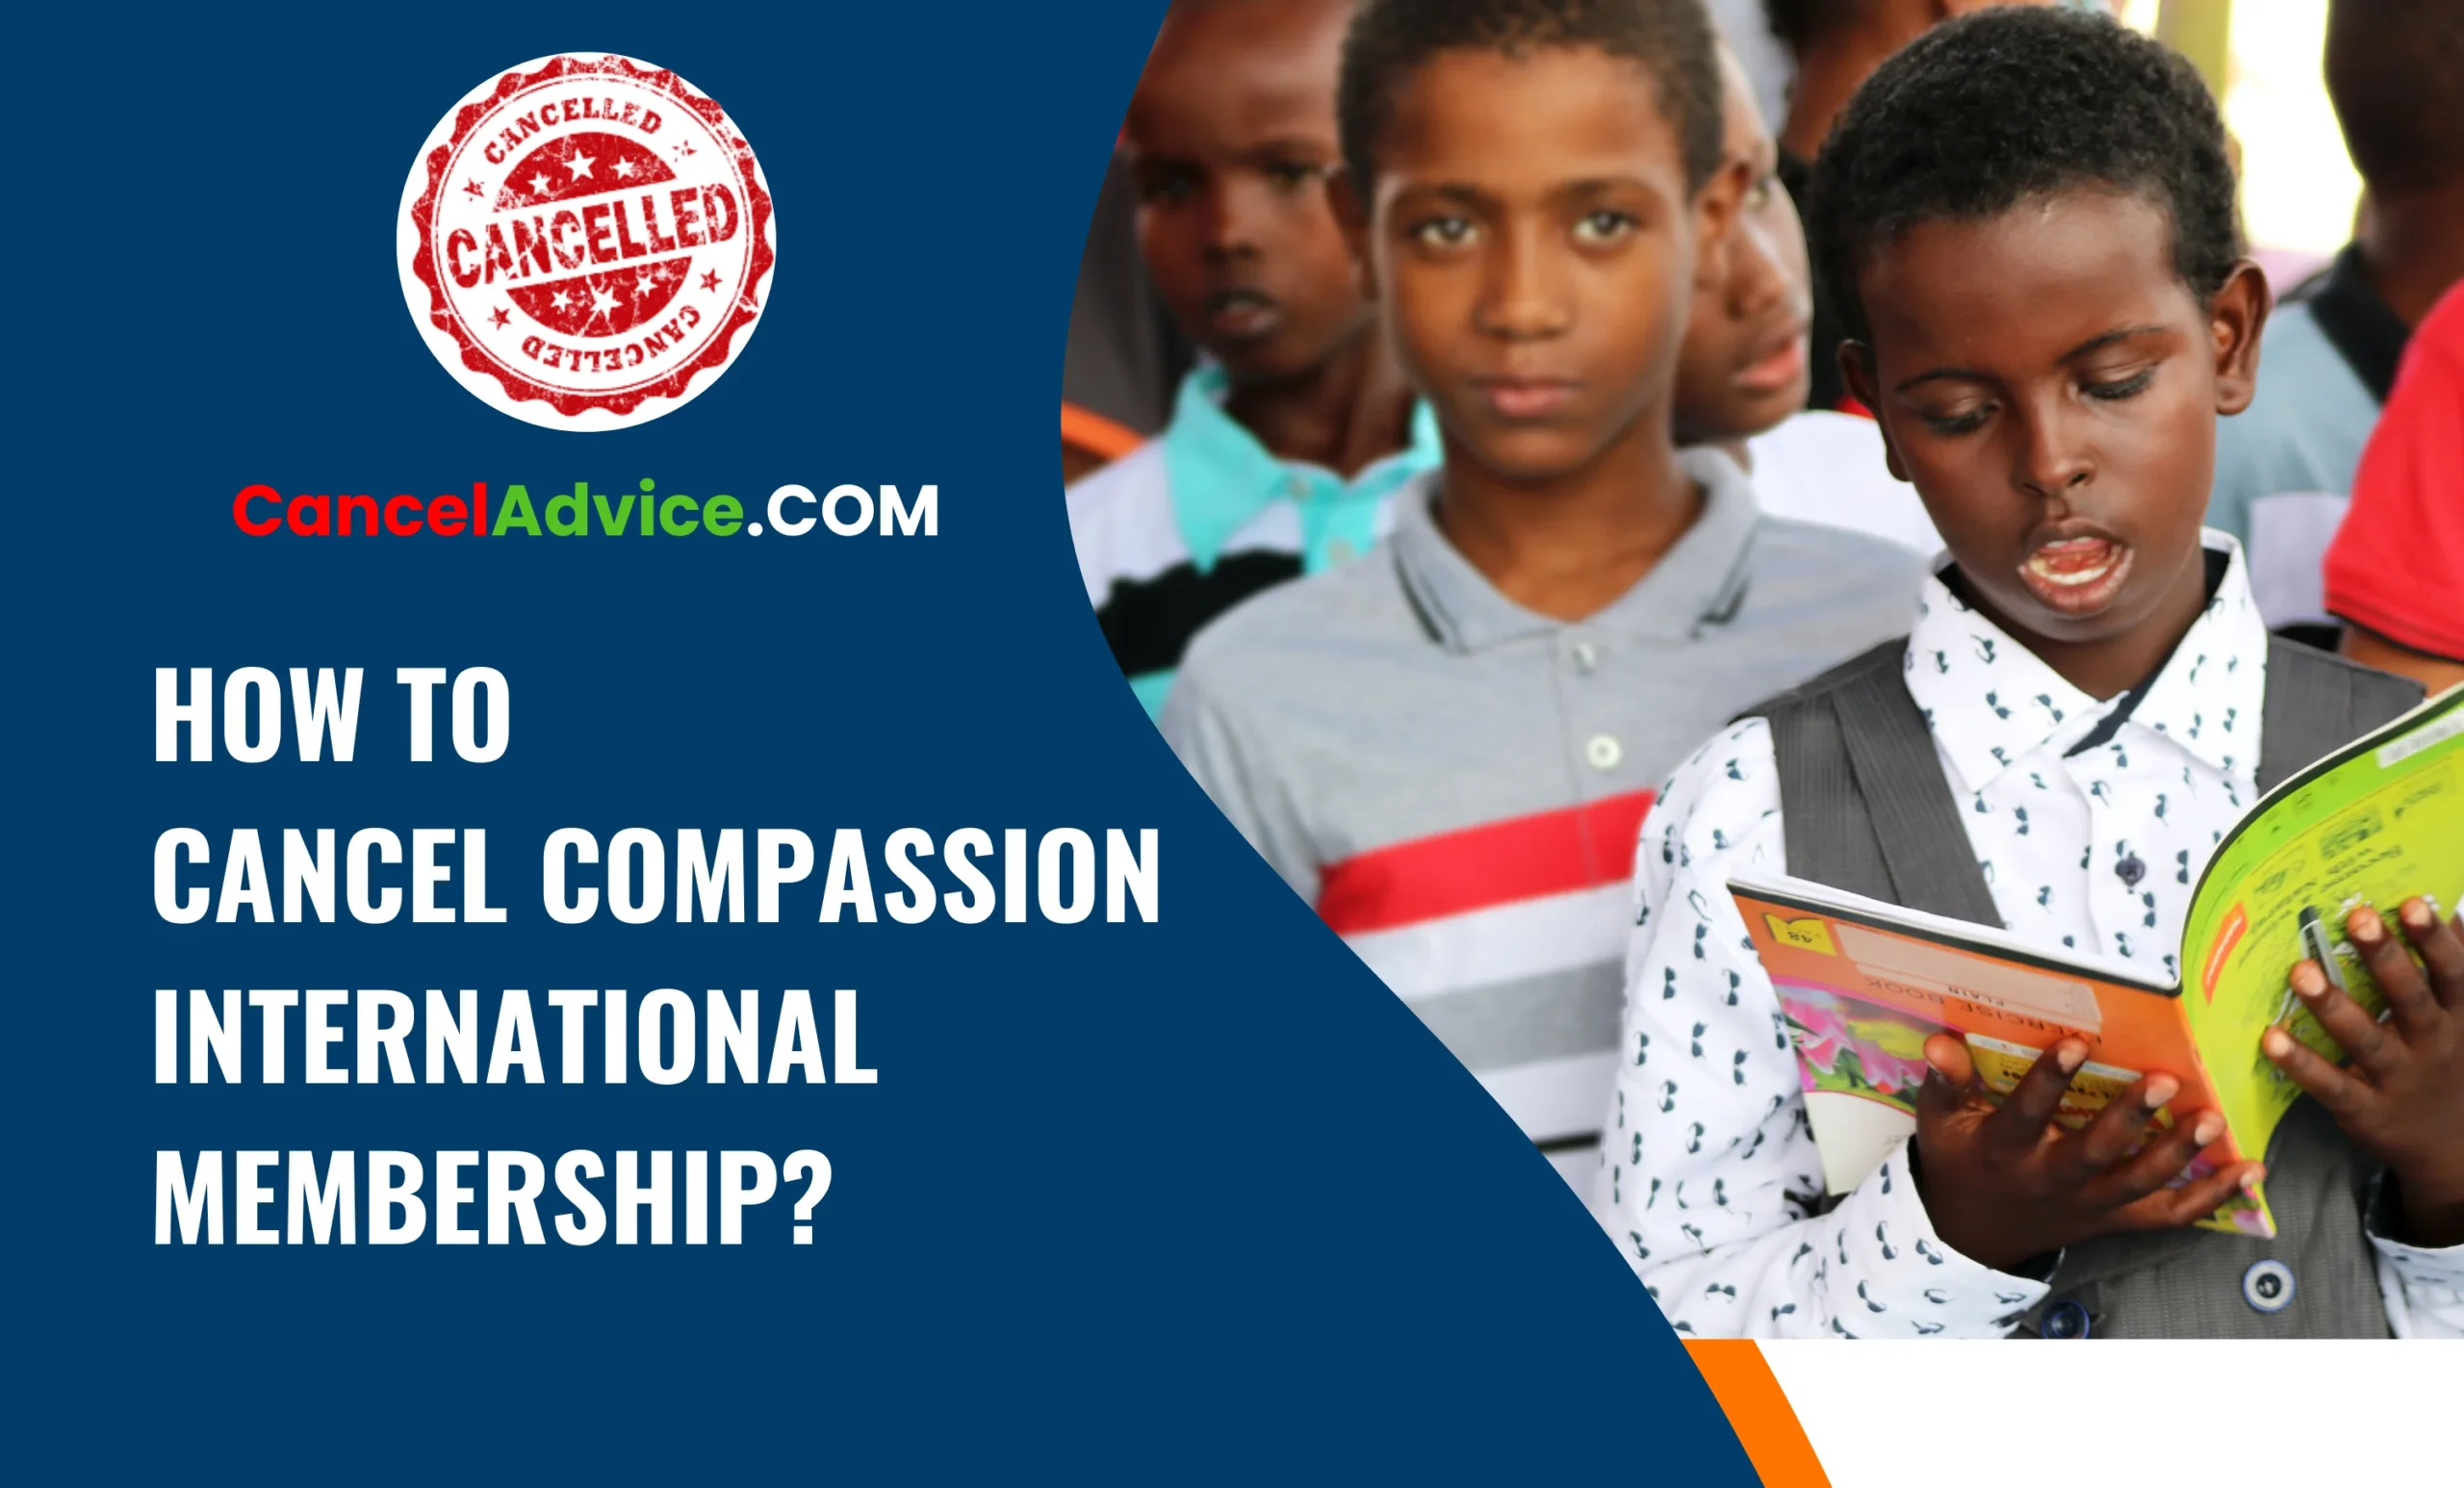 How To Cancel Compassion International Membership